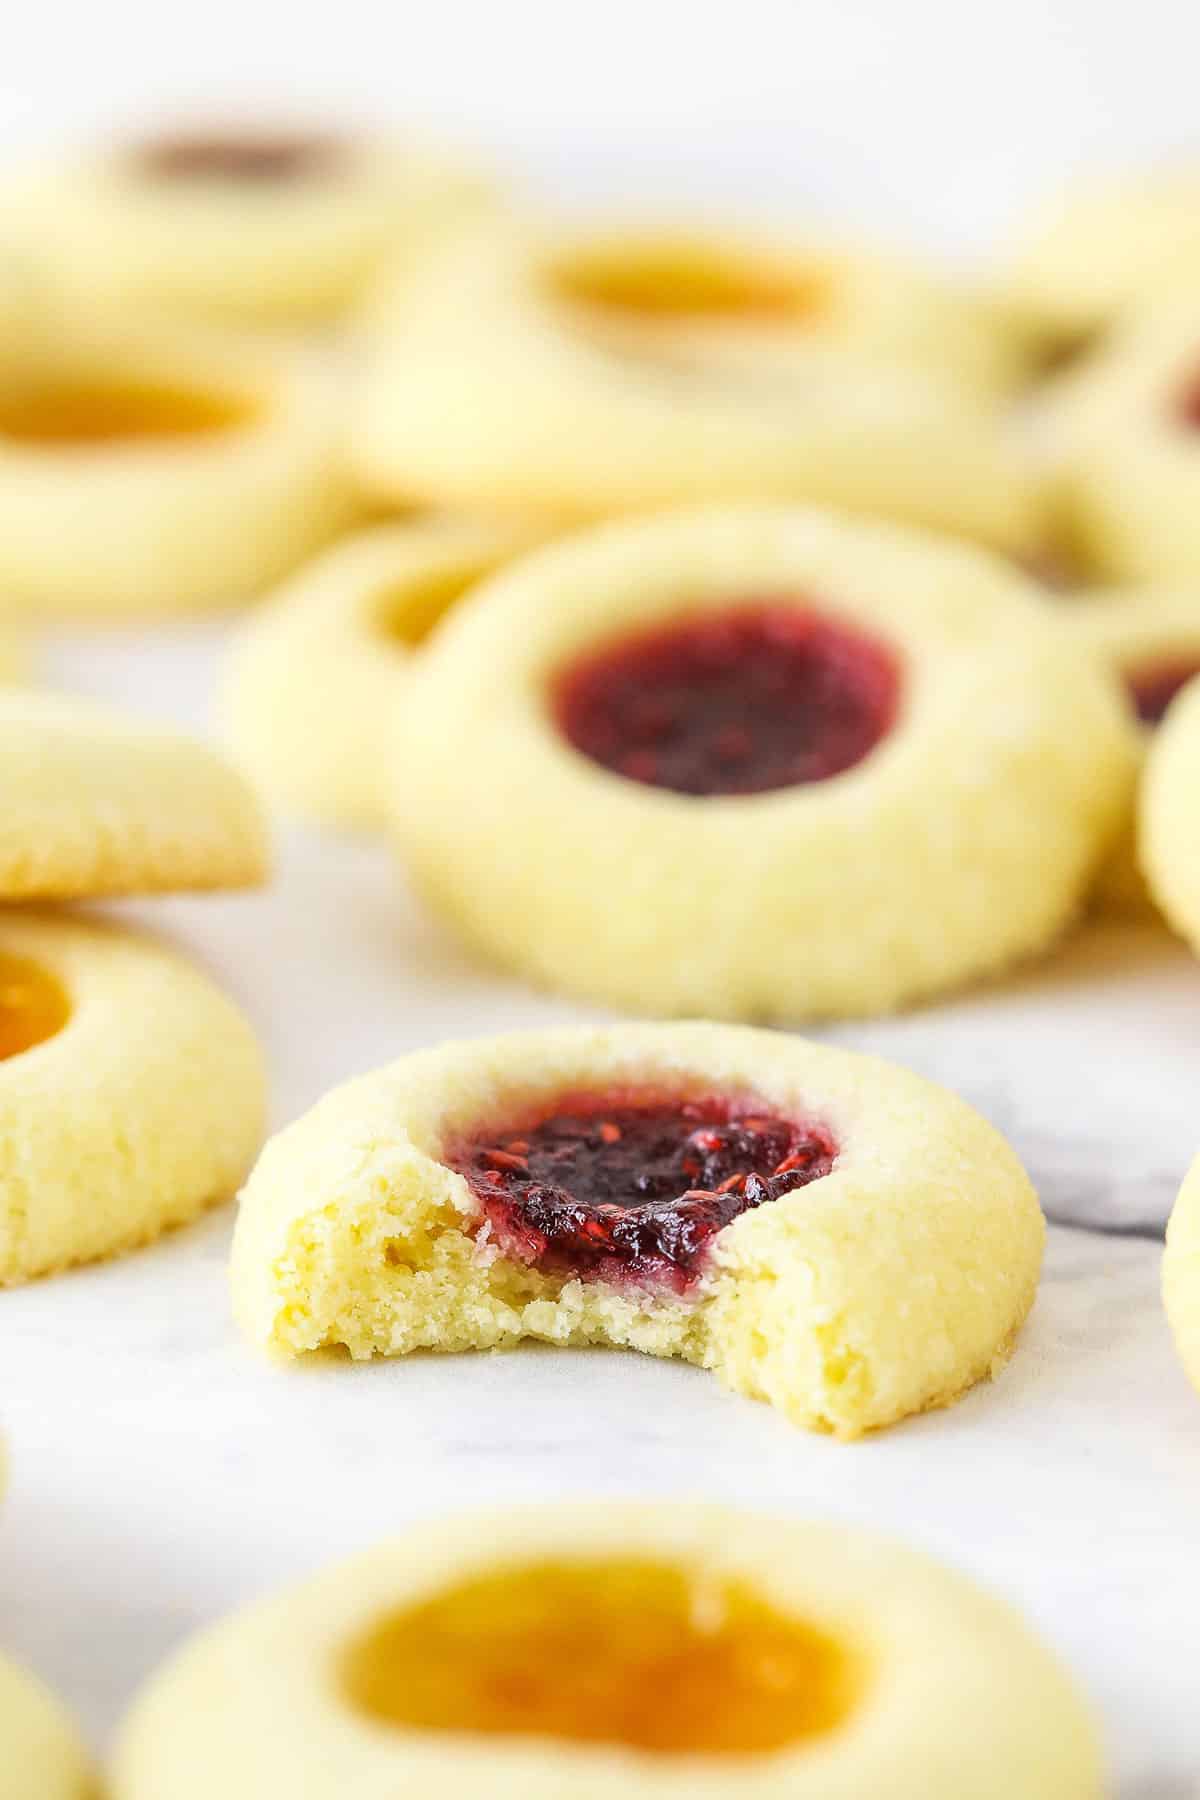 Soft Cookies with a Fresh Jam Filling